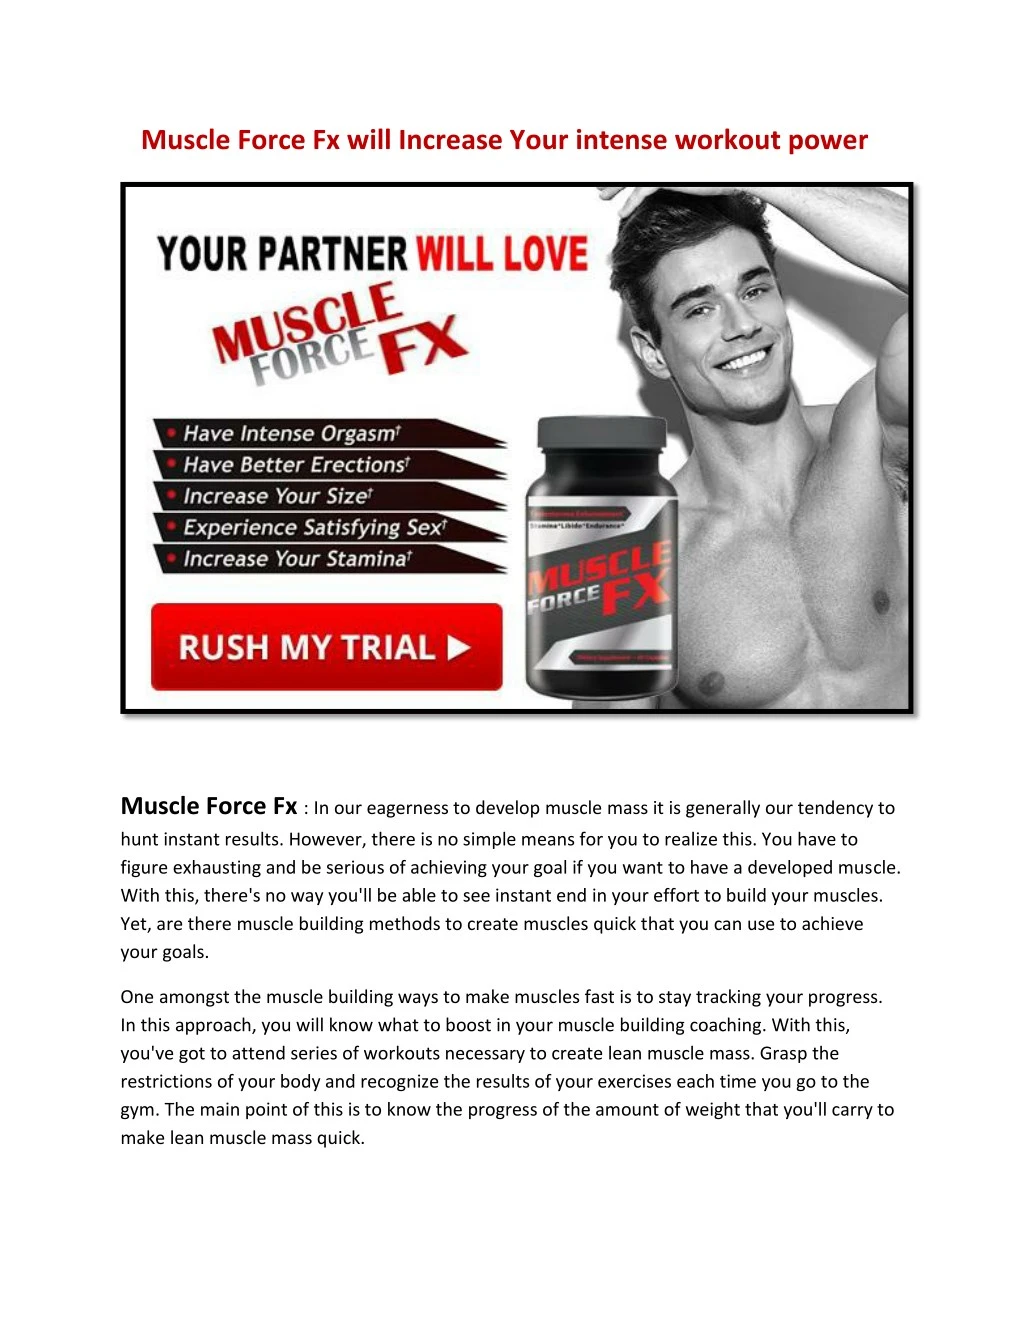 muscle force fx will increase your intense